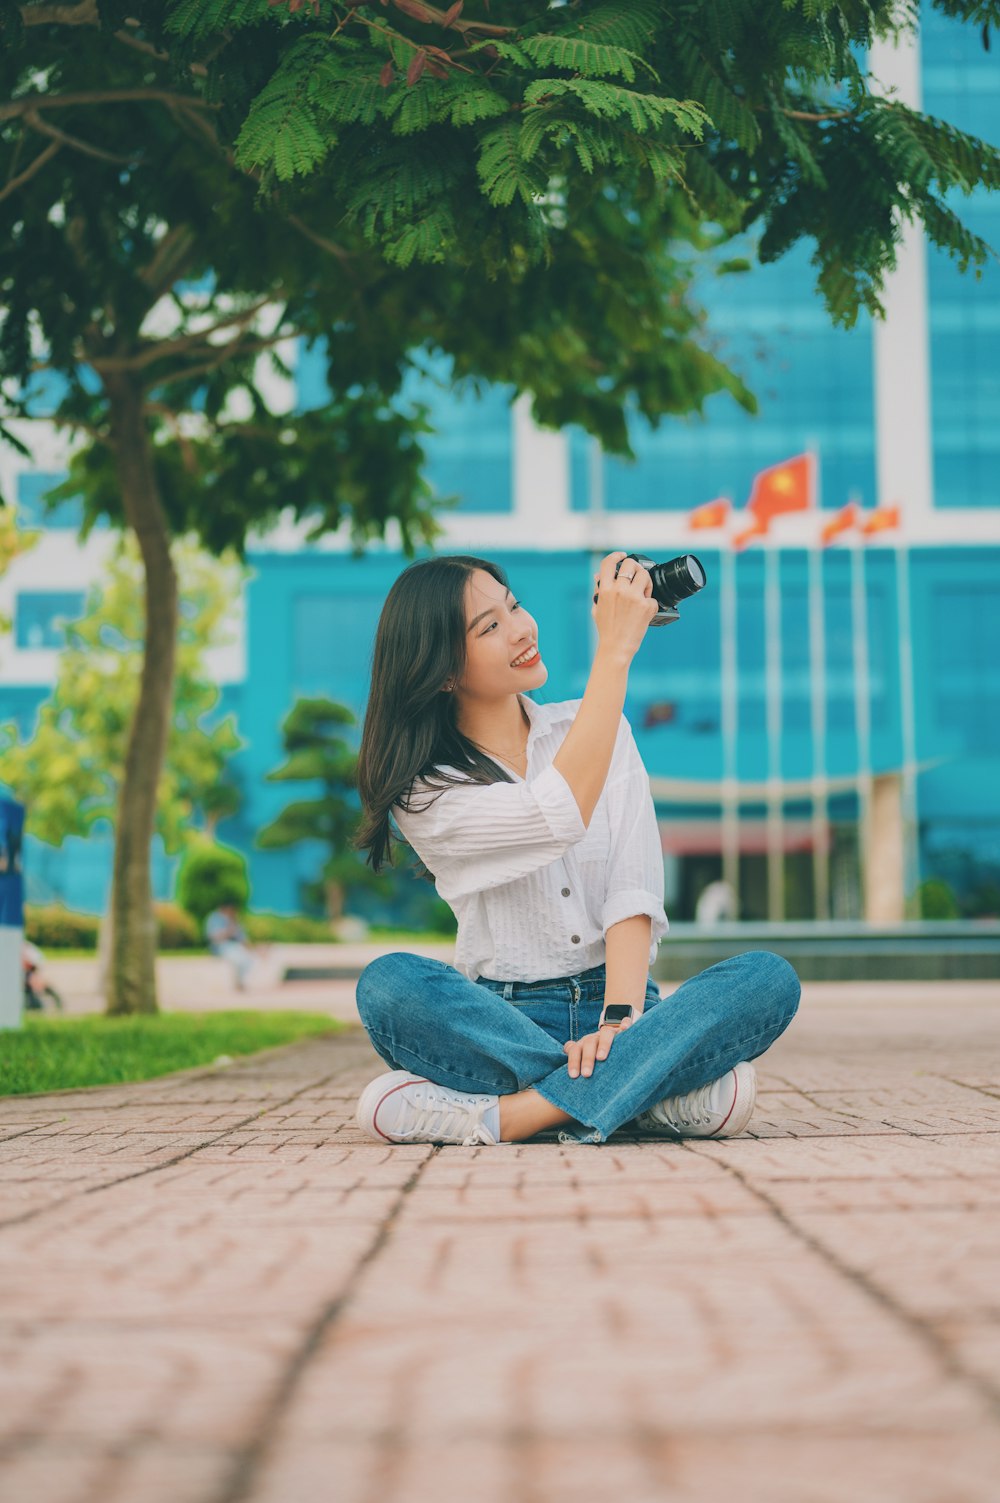 a woman sitting on the ground taking a picture